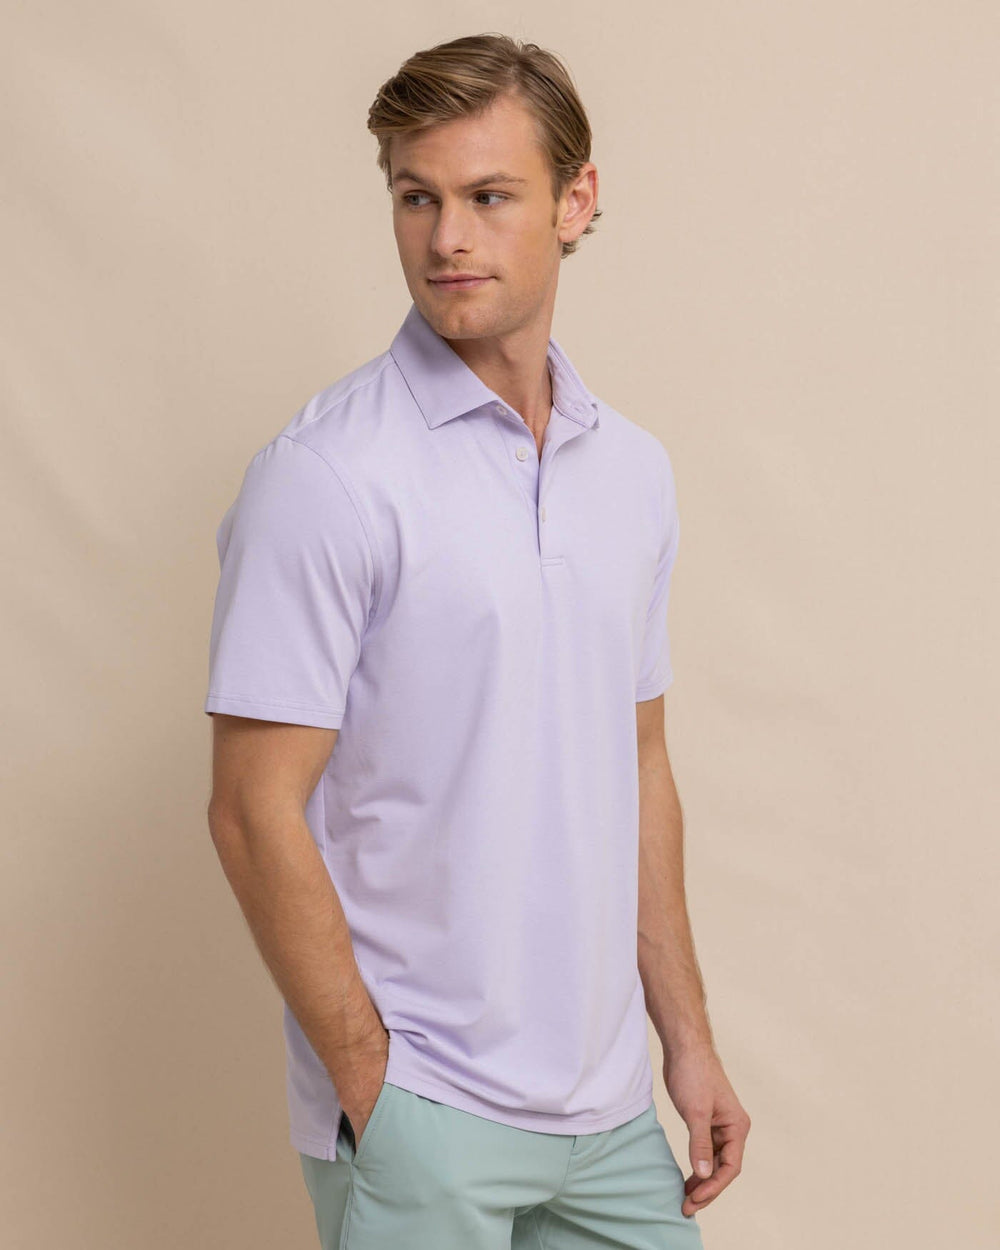 The front view of the Southern Tide brrr eeze Heather Performance Polo Shirt by Southern Tide - Heather Orchid Petal